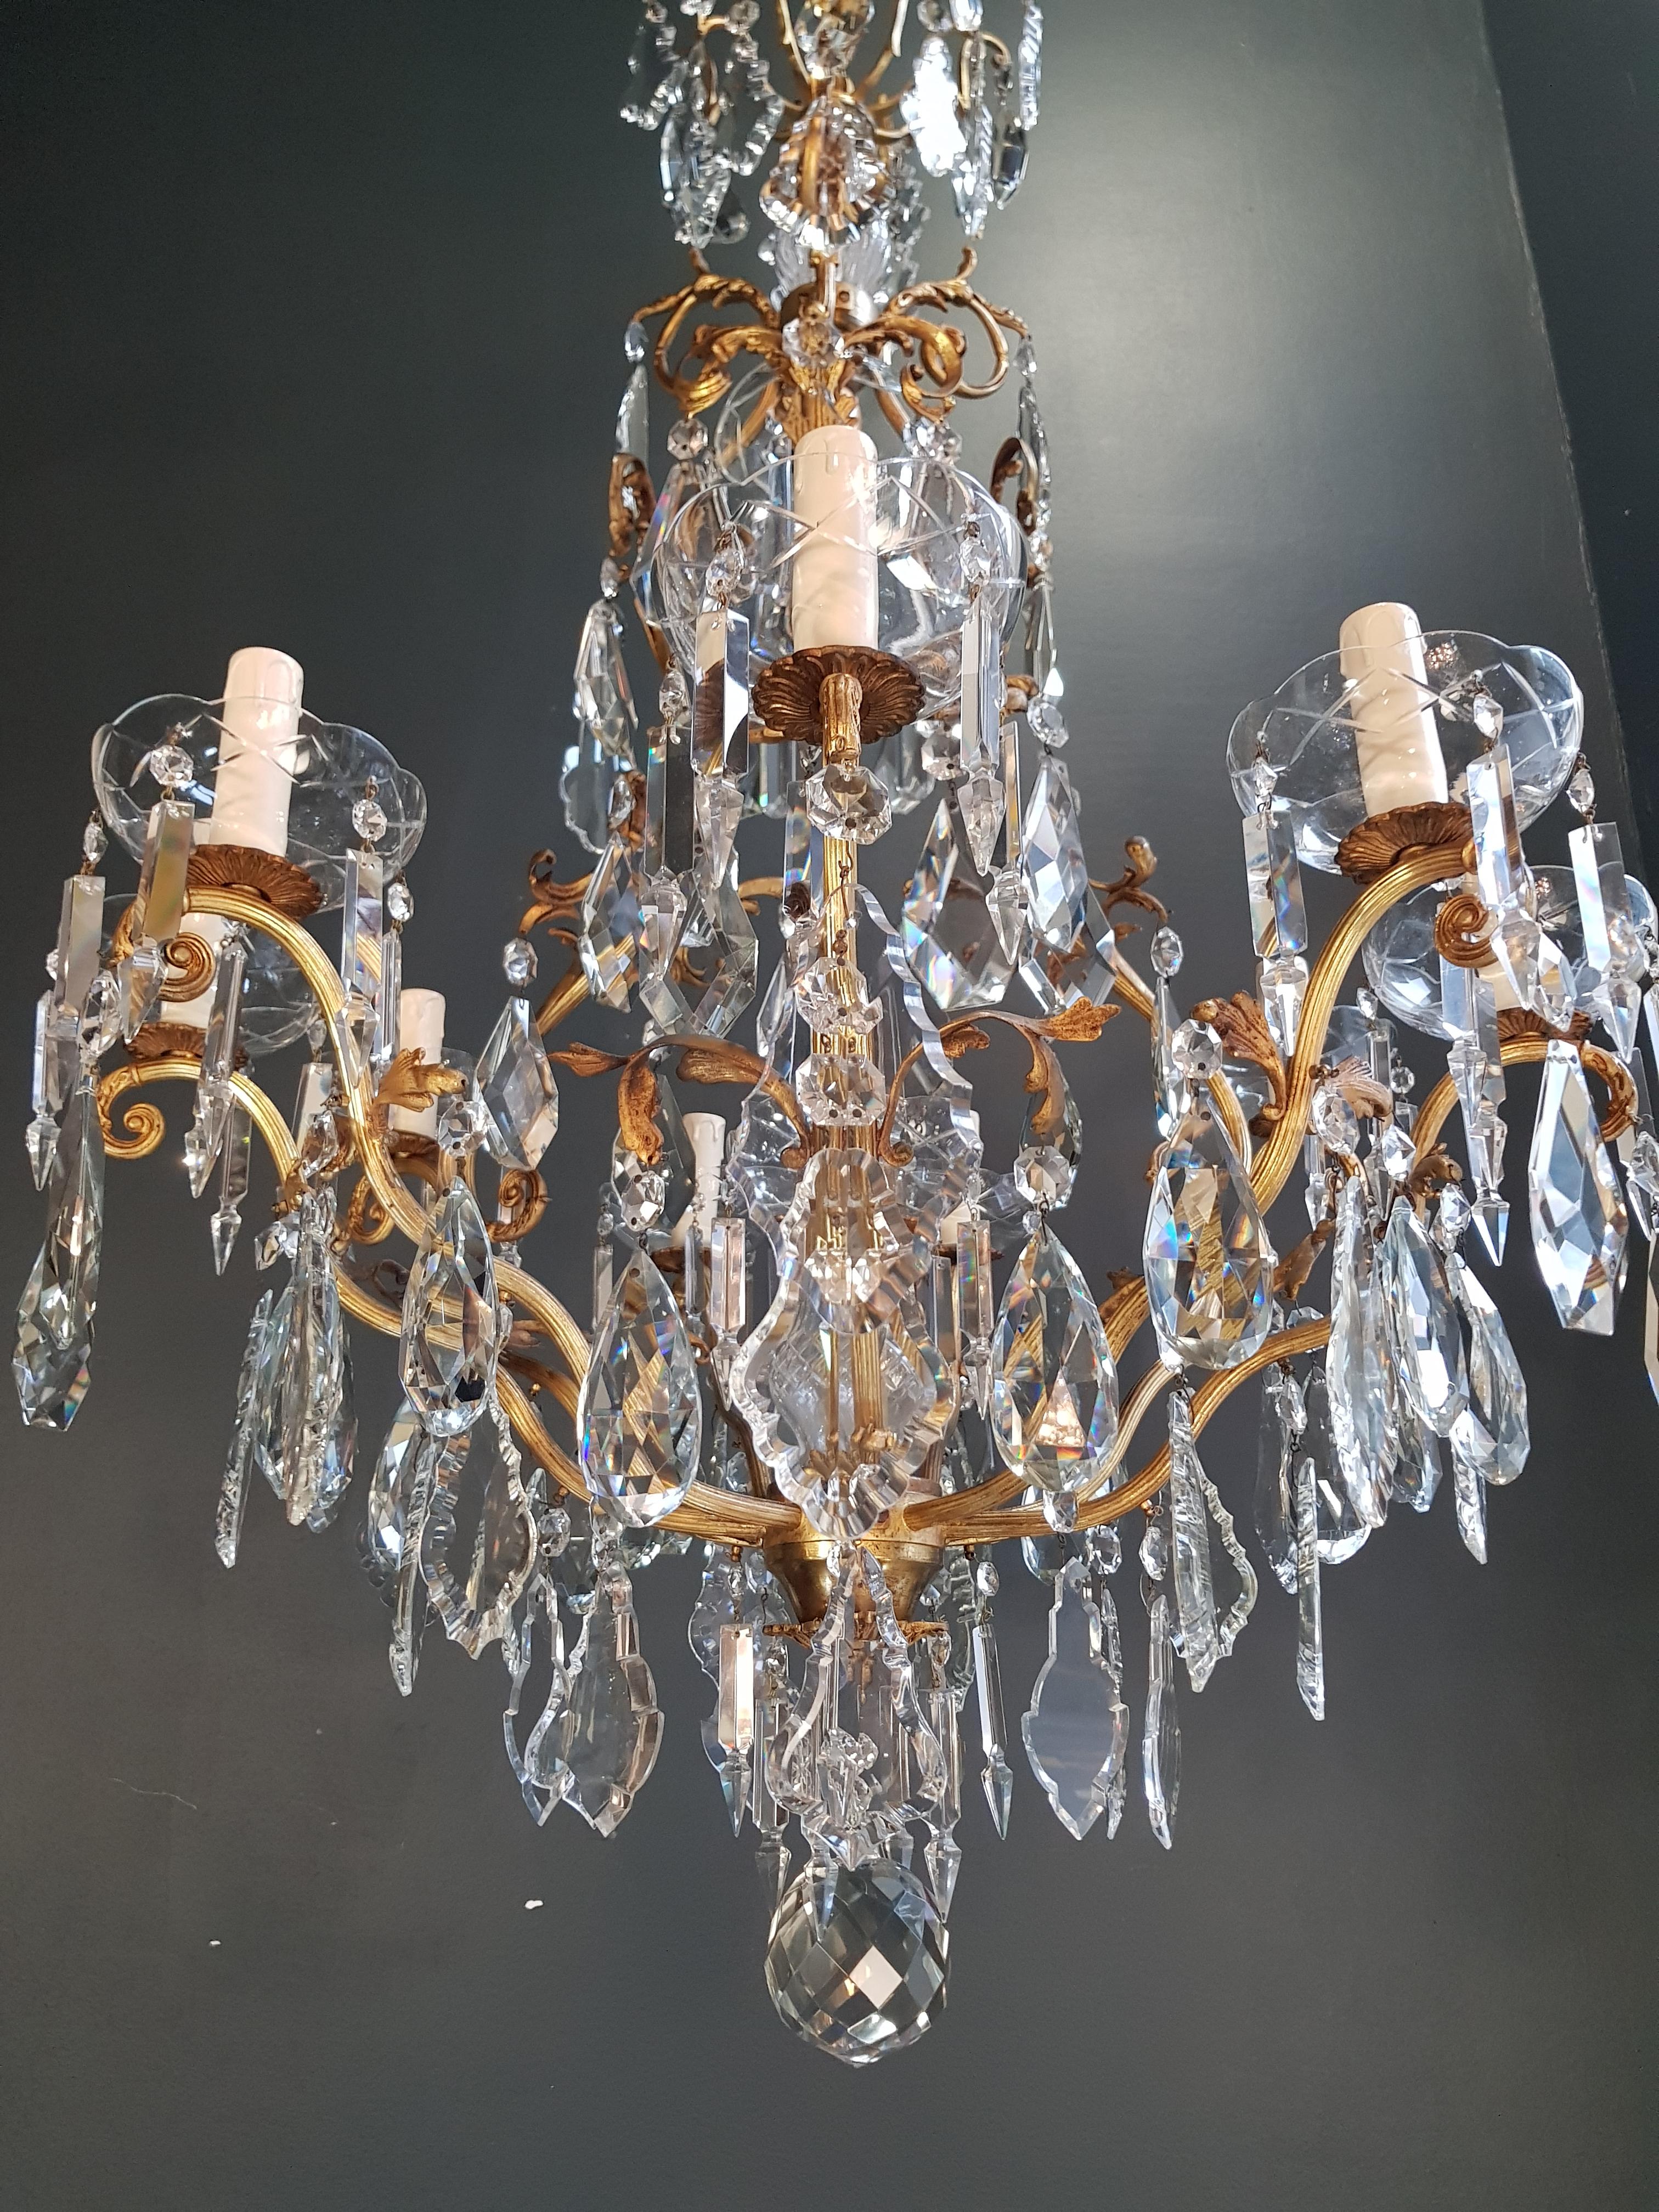 Early 20th Century French Crystal Chandelier Antique Candelabrum Lustre Art Nouveau Rarity Brass